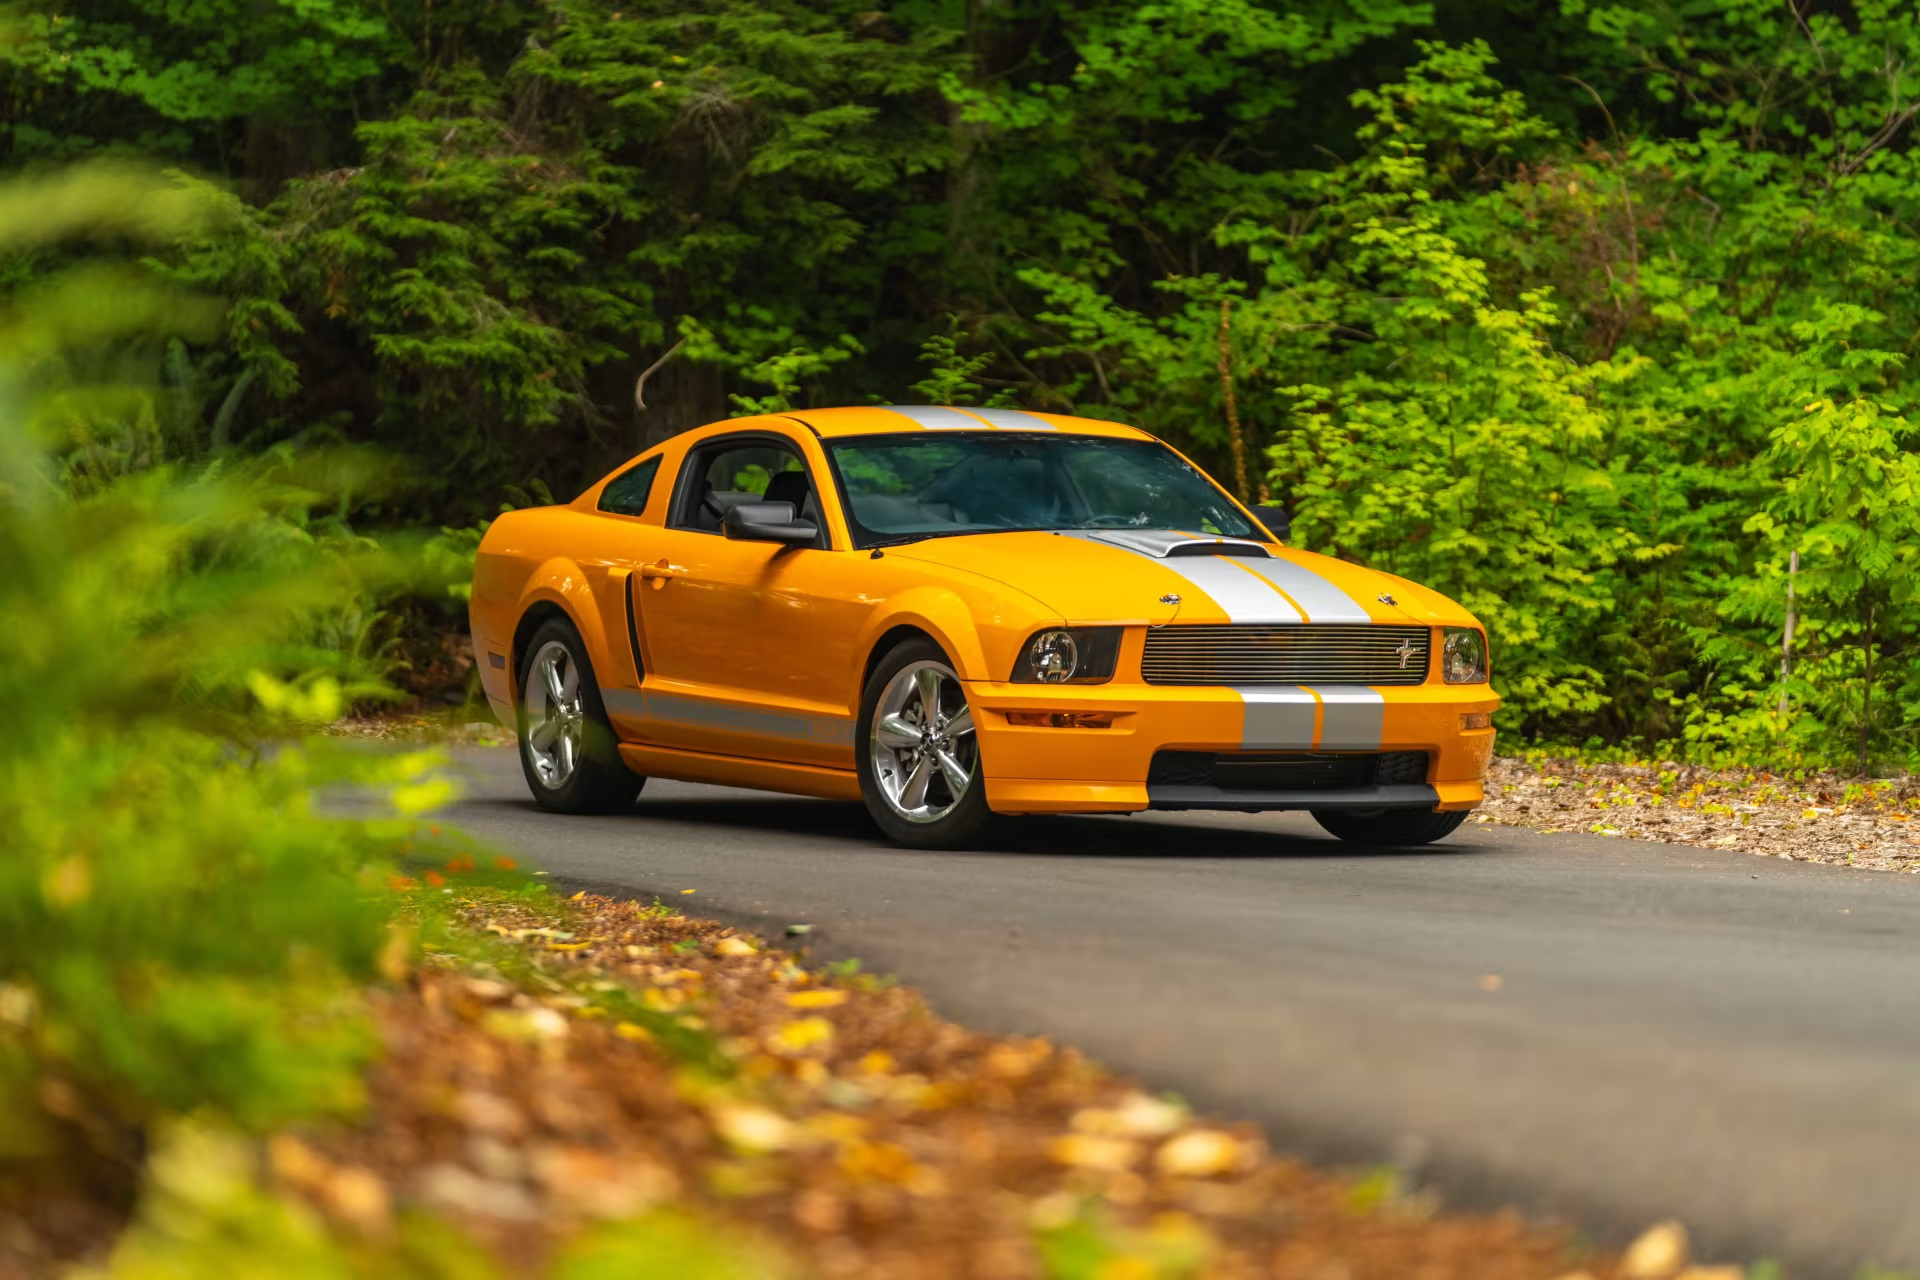 Mustang Of The Day: 2008 Ford Mustang Shelby GT-C